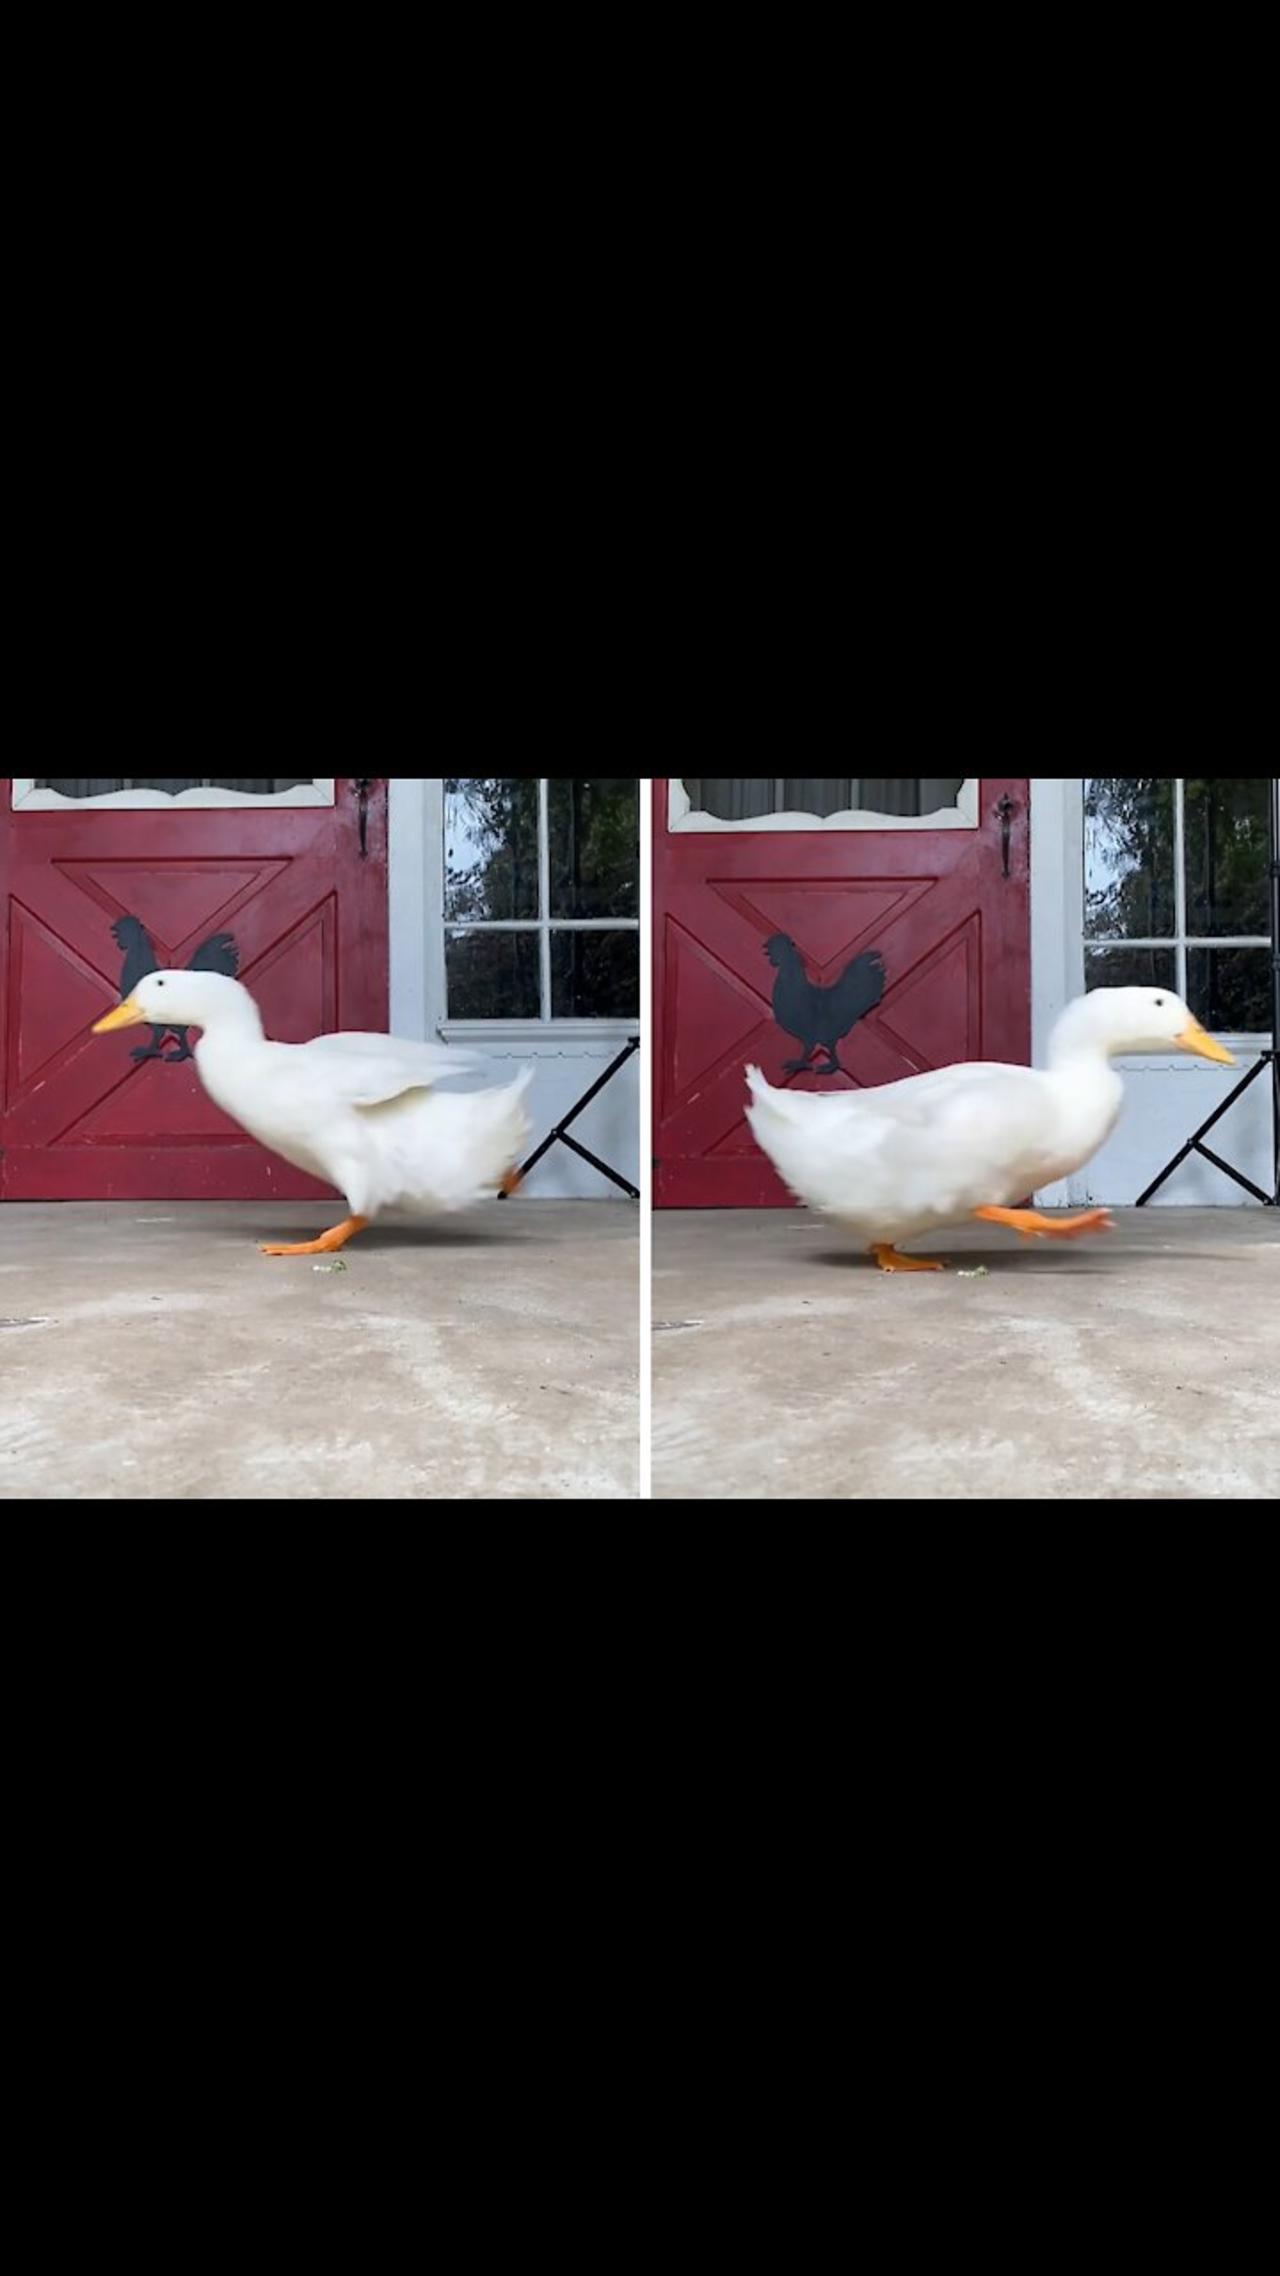 Duck adorably runs back and forth in front of the camera